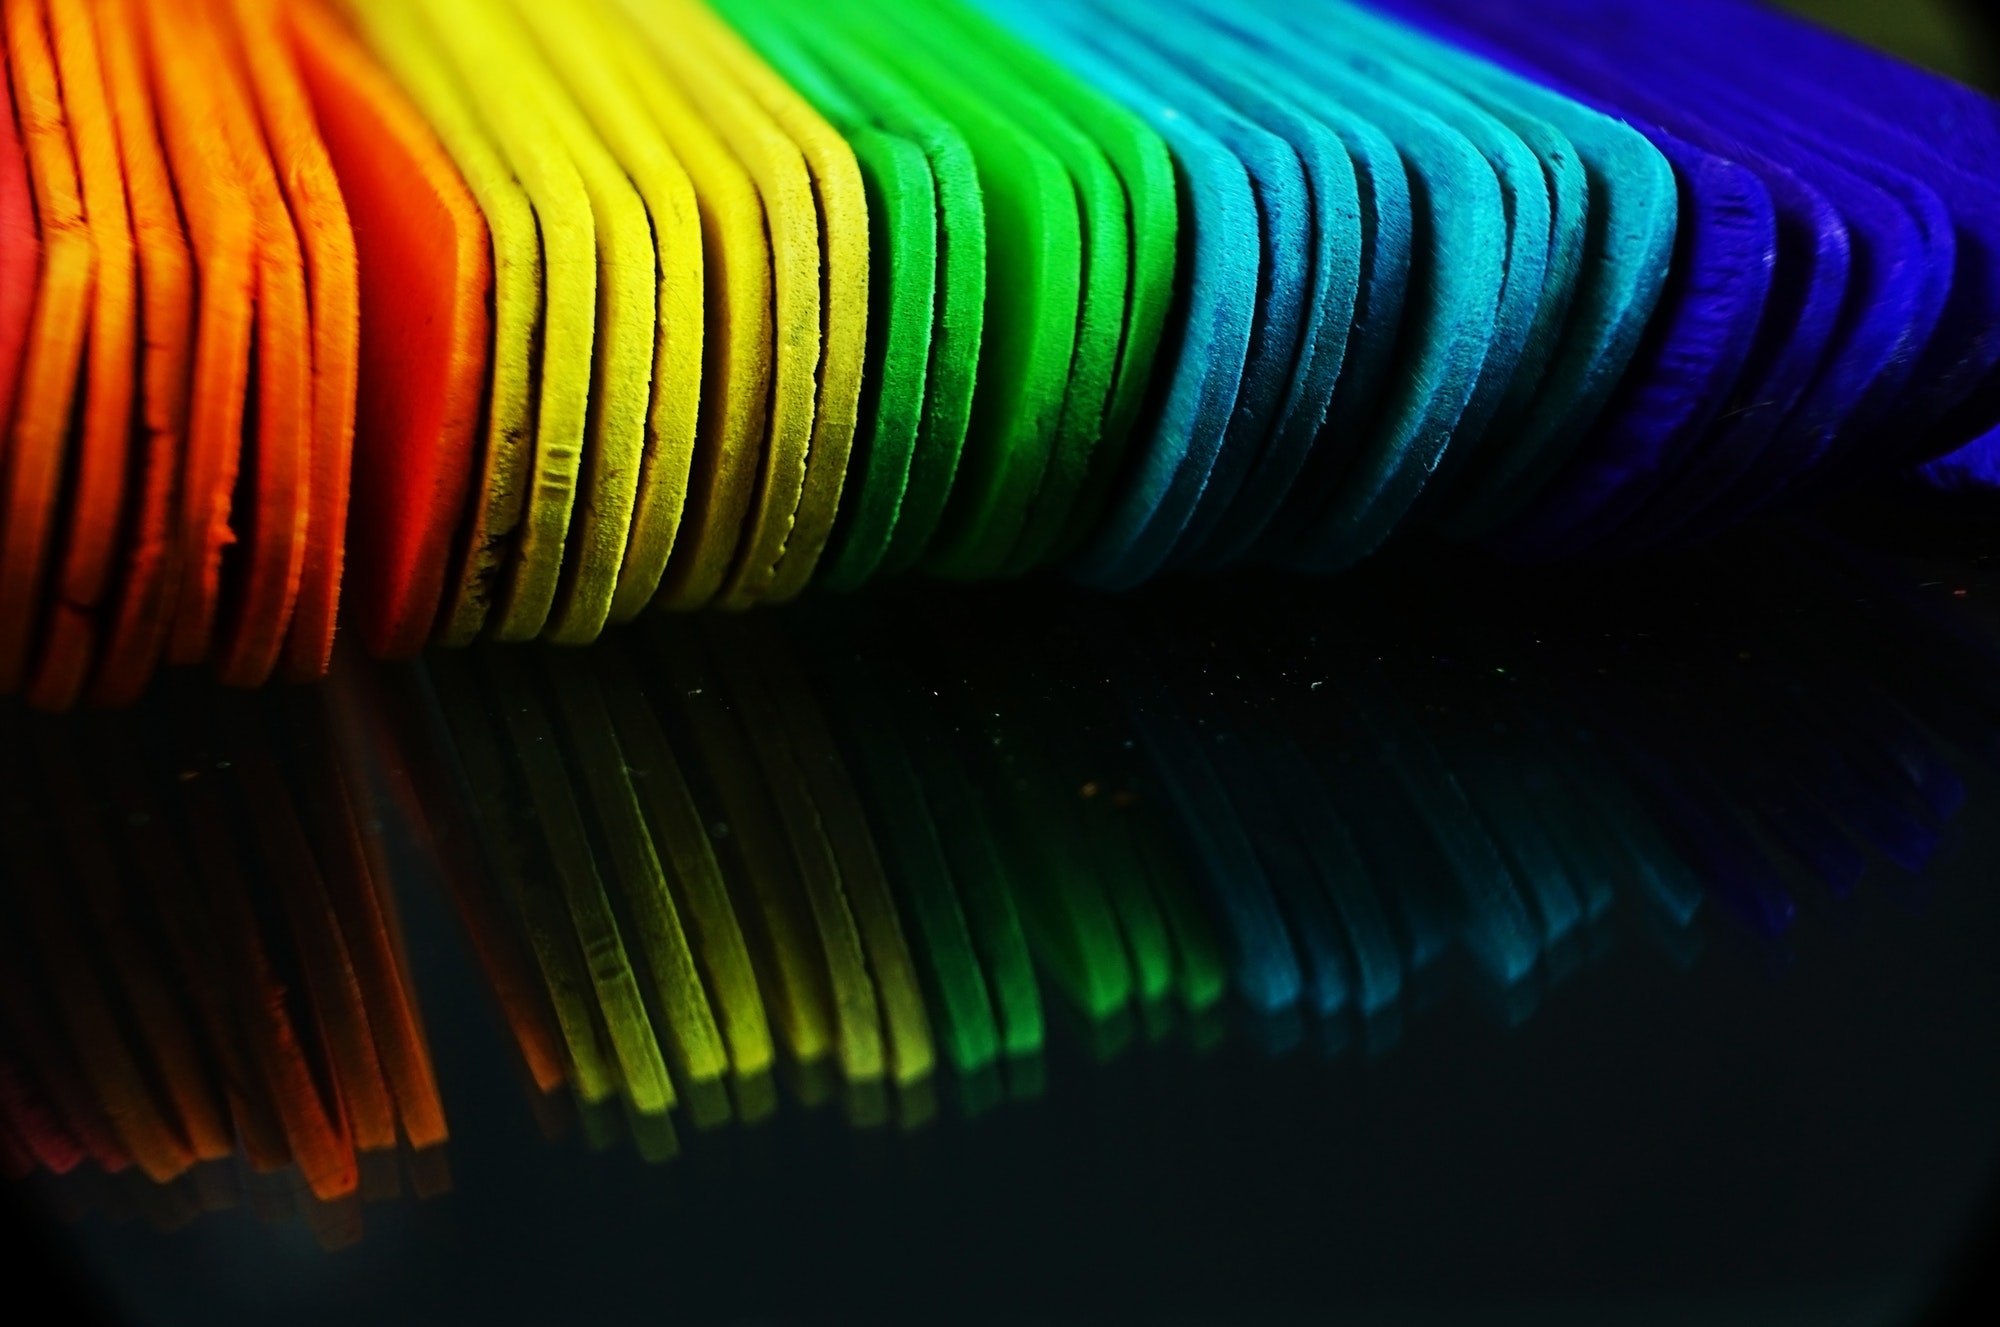 Rainbow abstract macro done with colorful wooden sticks